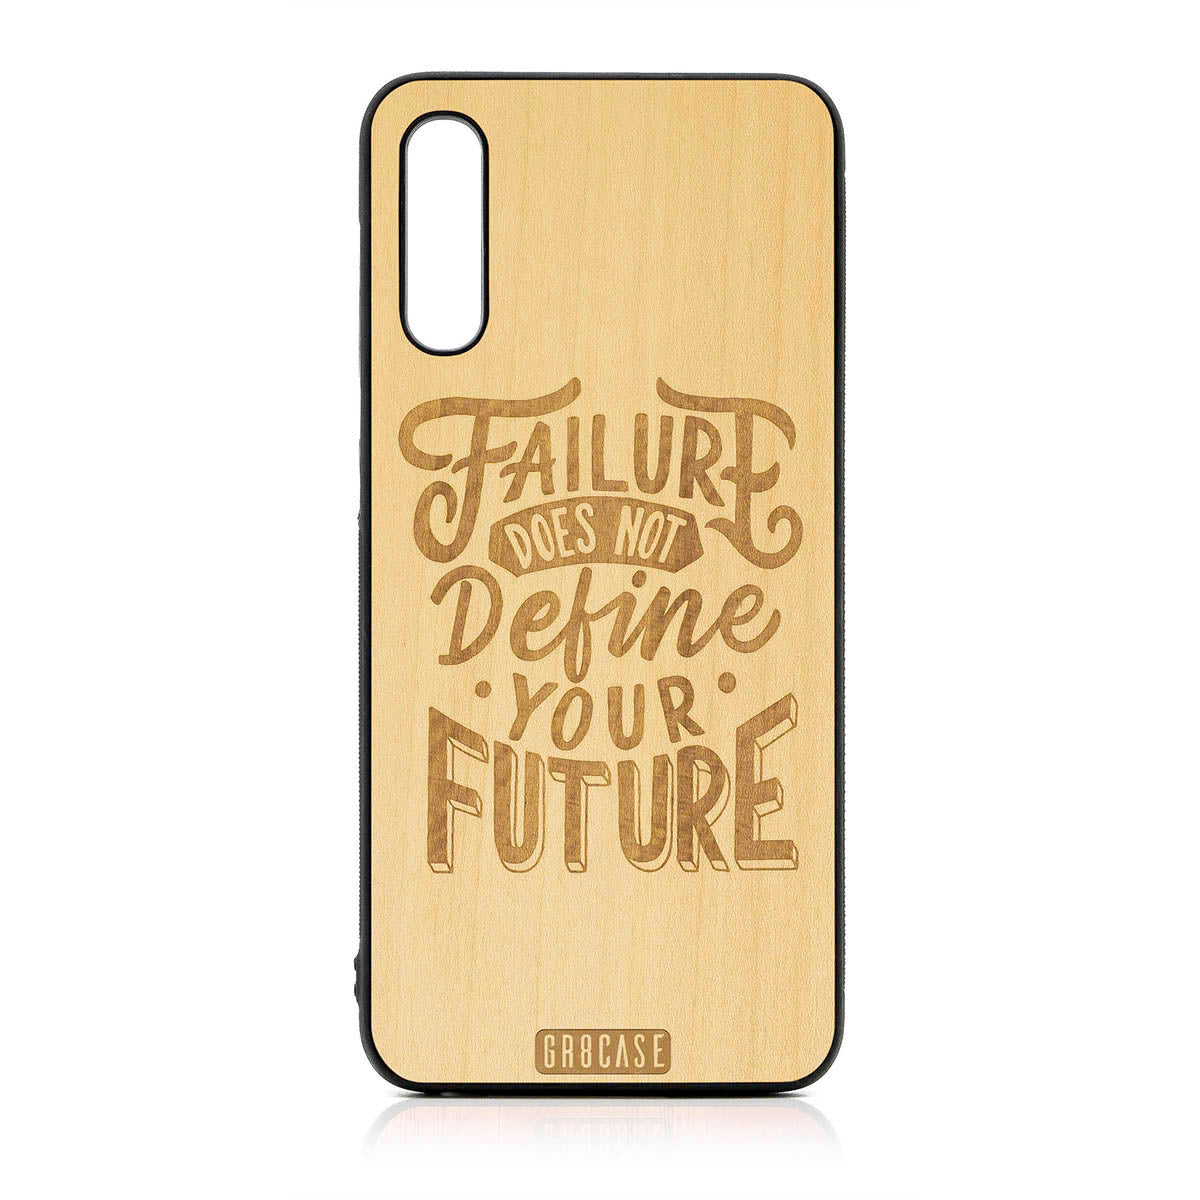 Failure Does Not Define You Future Design Wood Case For Samsung Galaxy A50 by GR8CASE